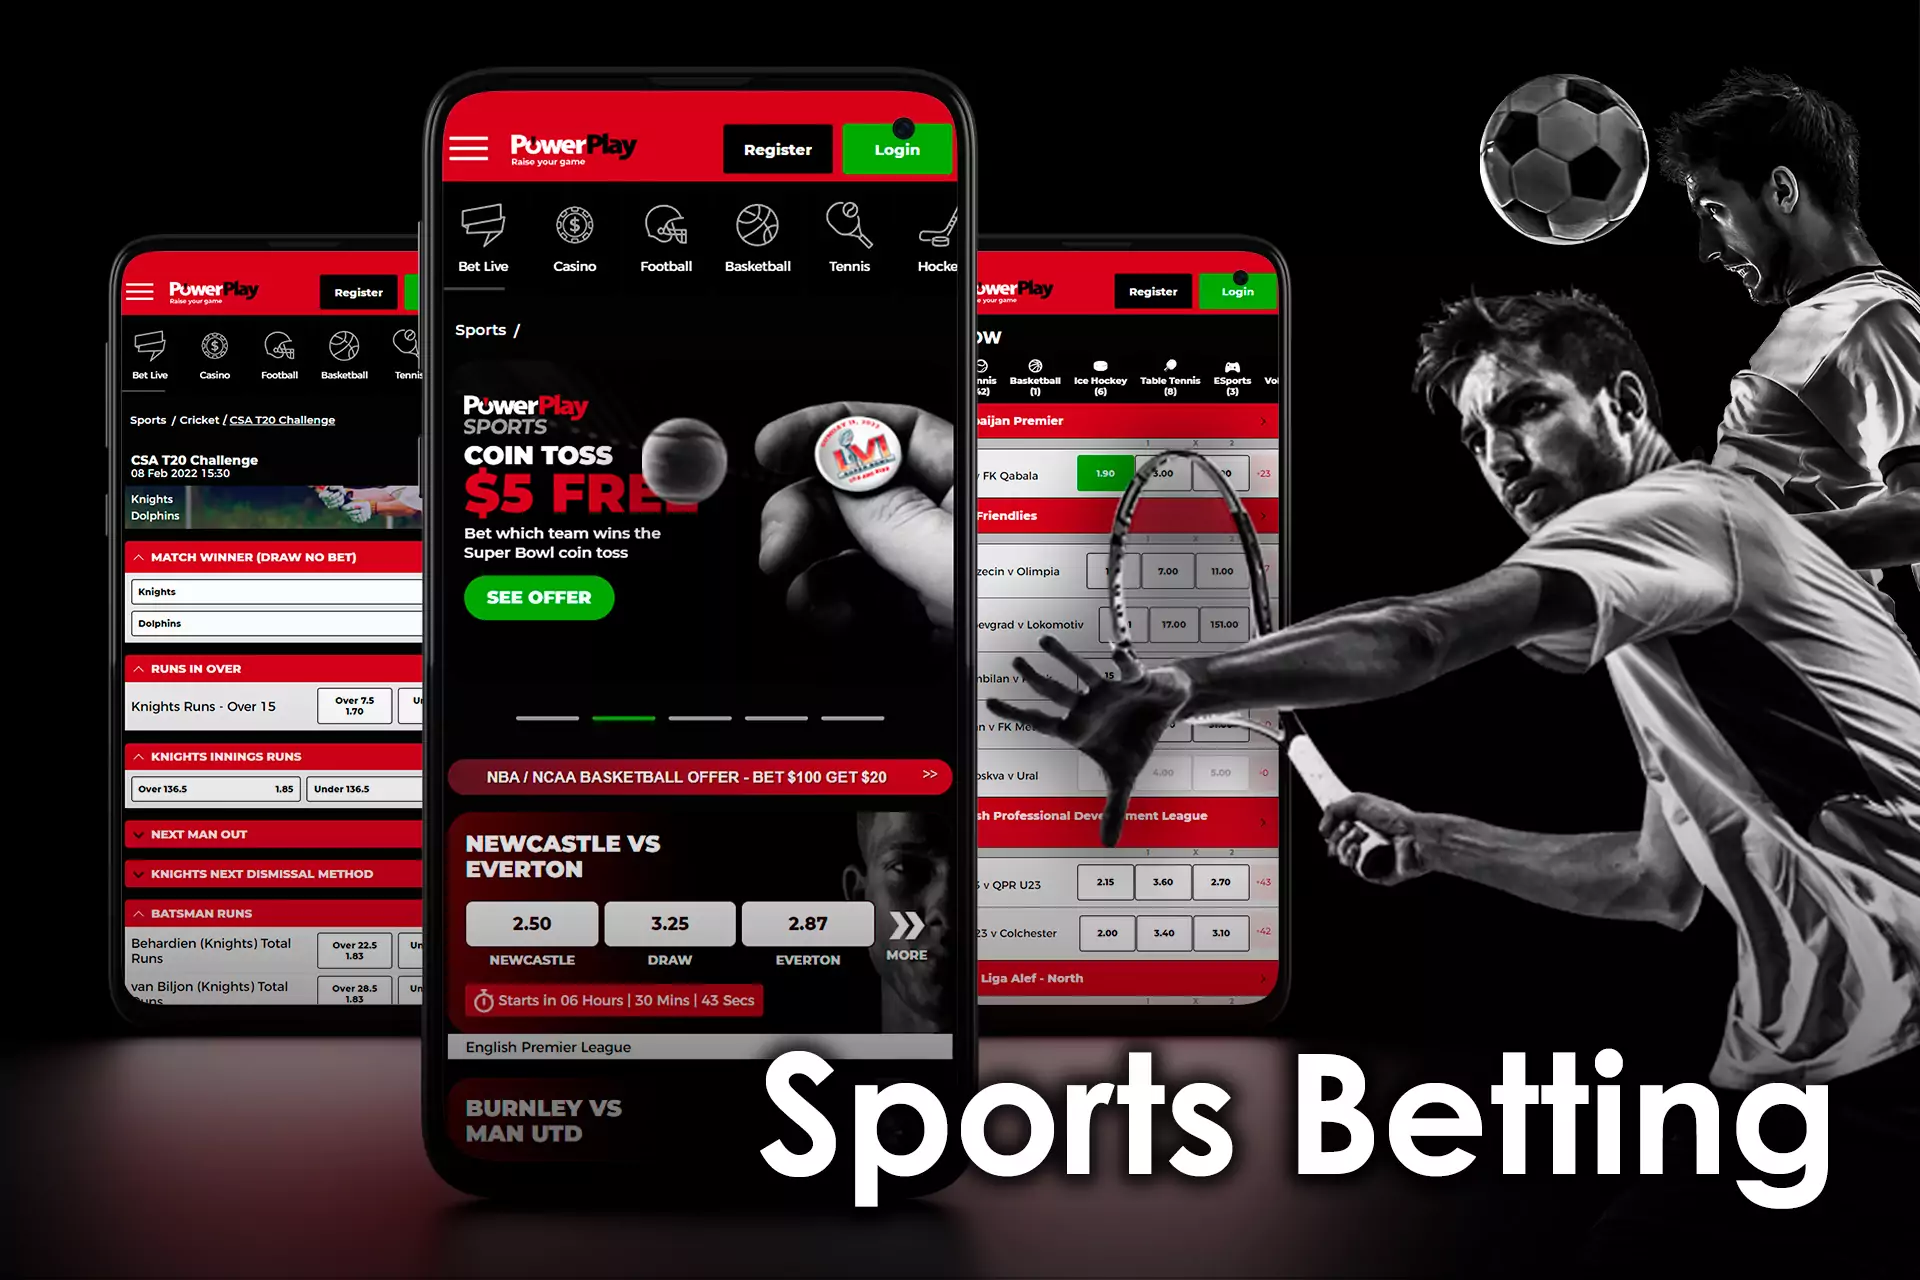 If you are a sports fan, you should try betting possibilities at the Power Play site.